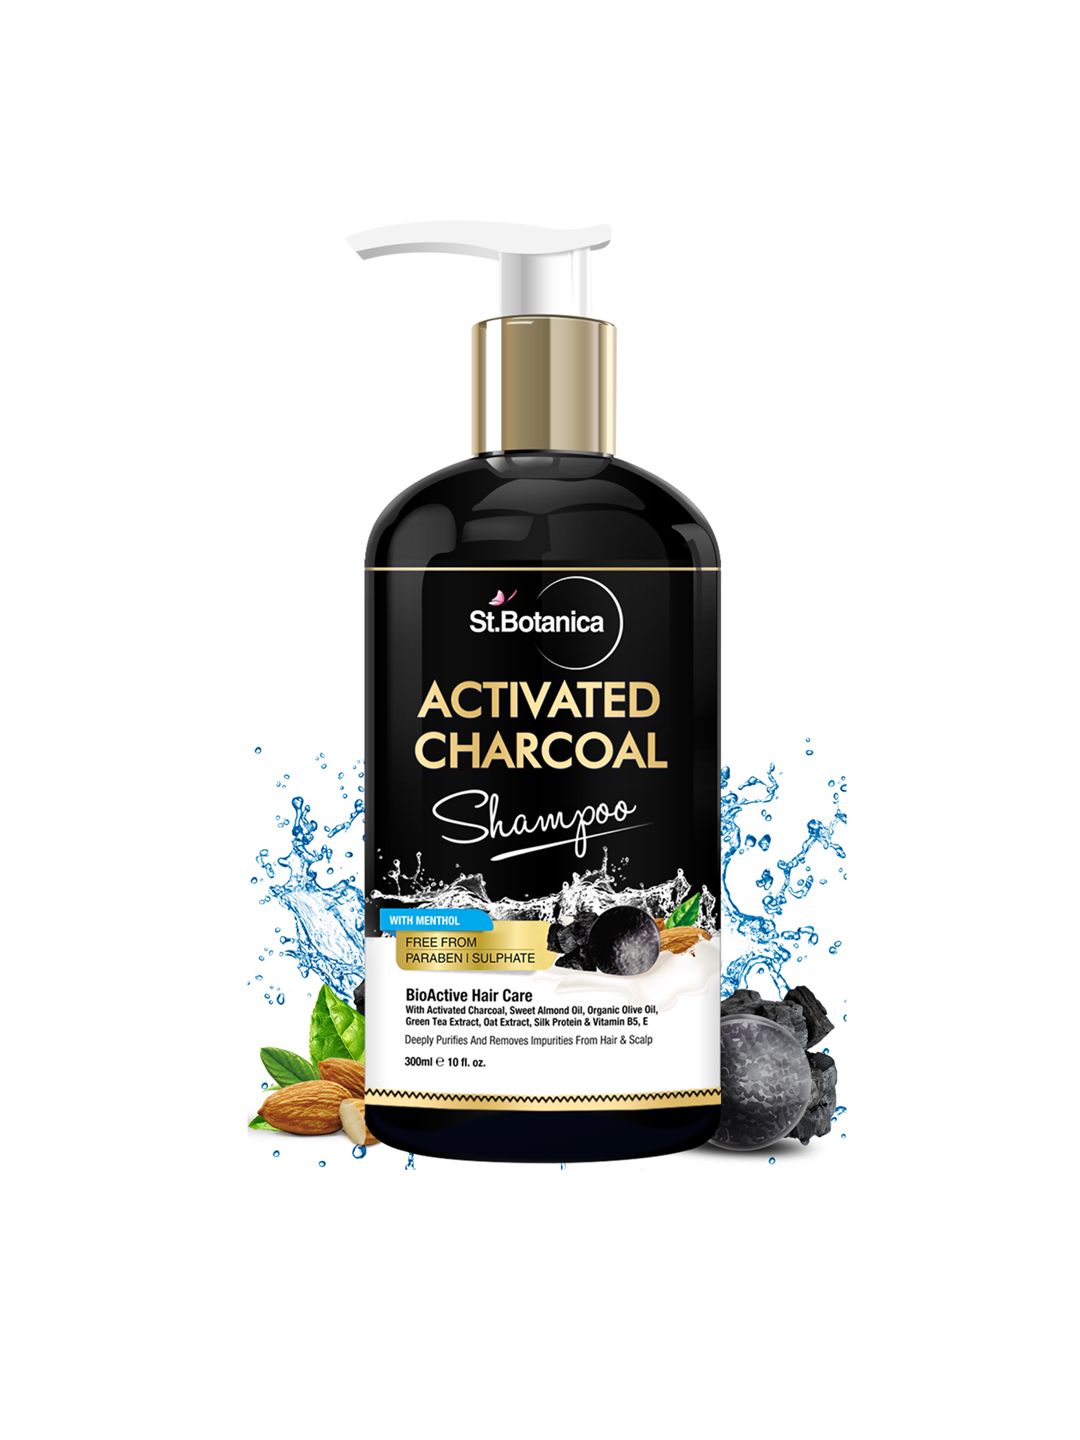 St.Botanica Activated Charcoal Hair Shampoo, 300 ml Price in India